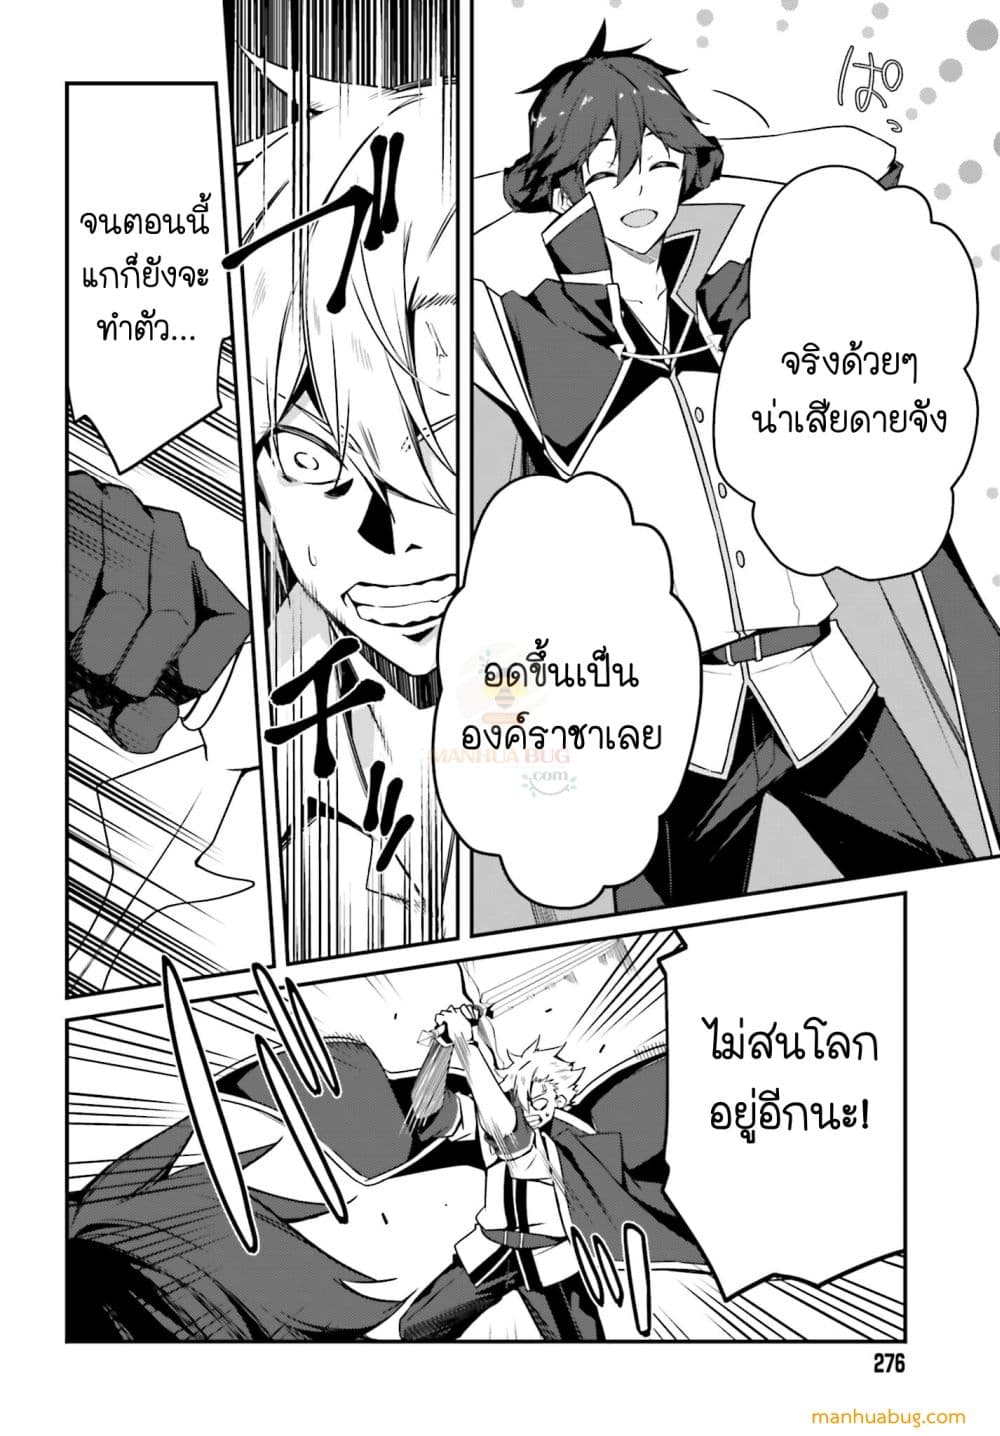 THE INCOMPETENT PRINCE WHO HAS BEEN BANISHED WANTS TO HIDE HIS ABILITIES~ ตอนที่ 1 (9)